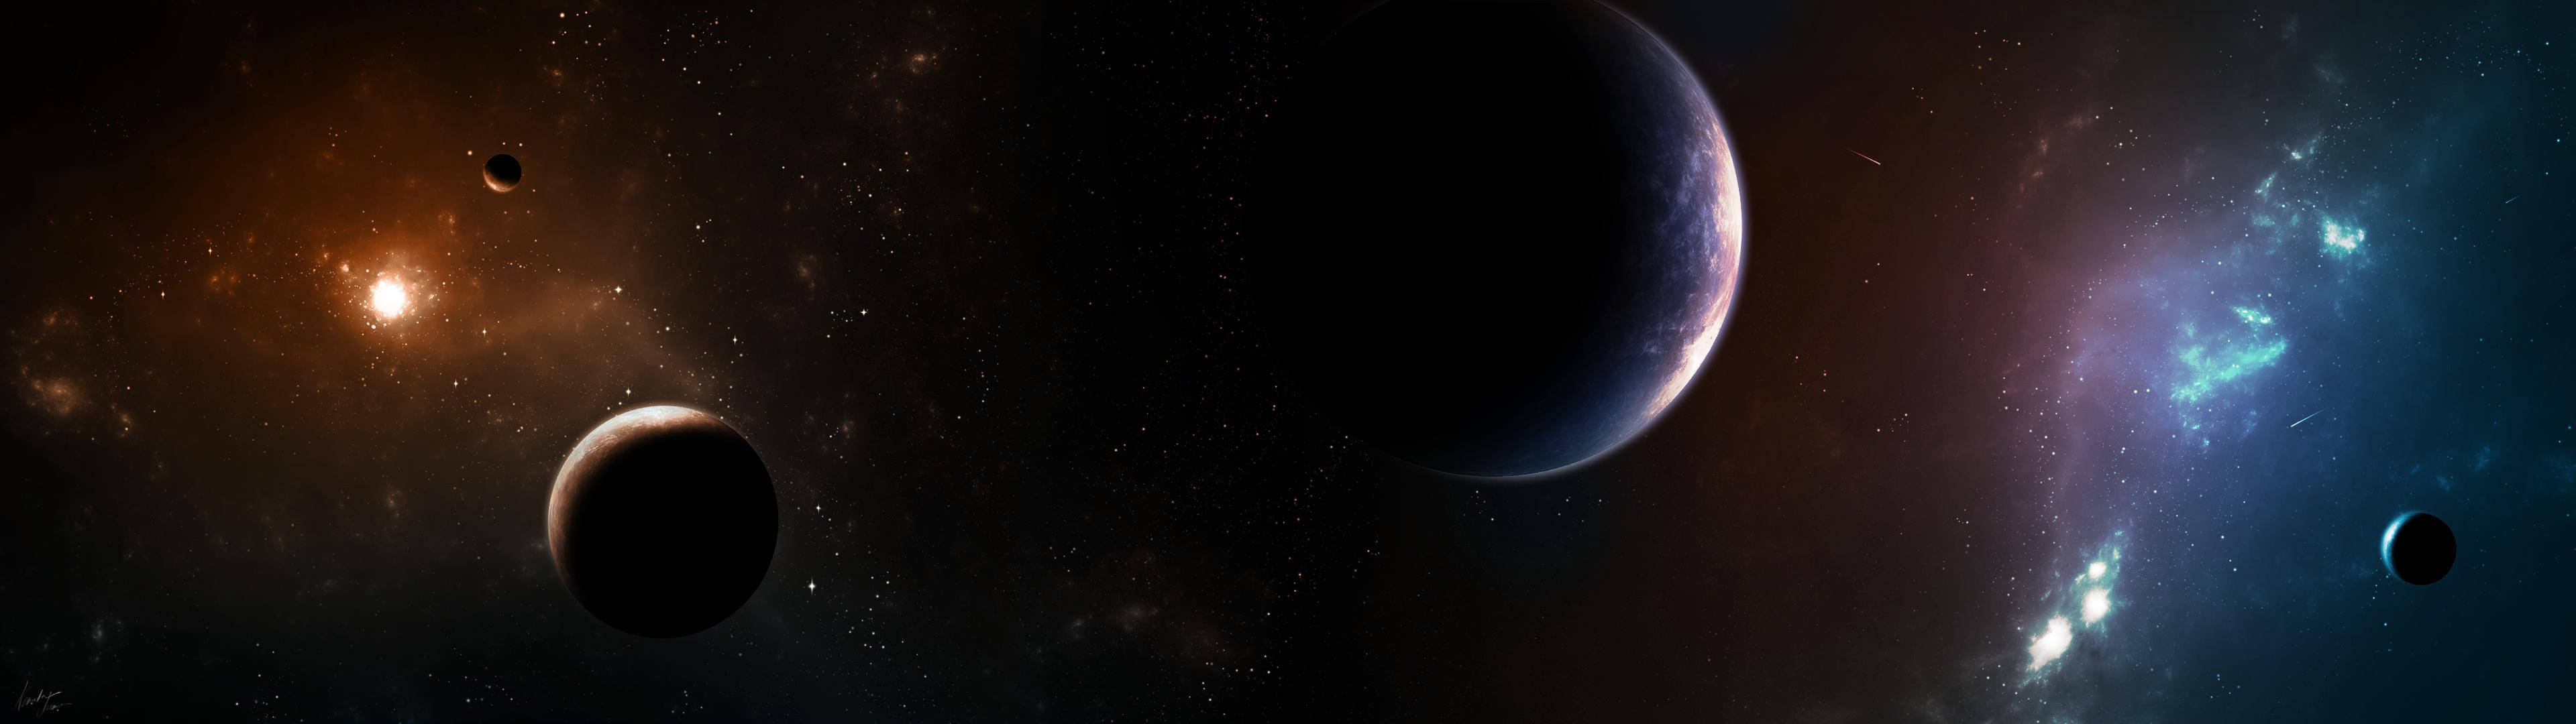 2 Monitor Stars And Planets Wallpaper